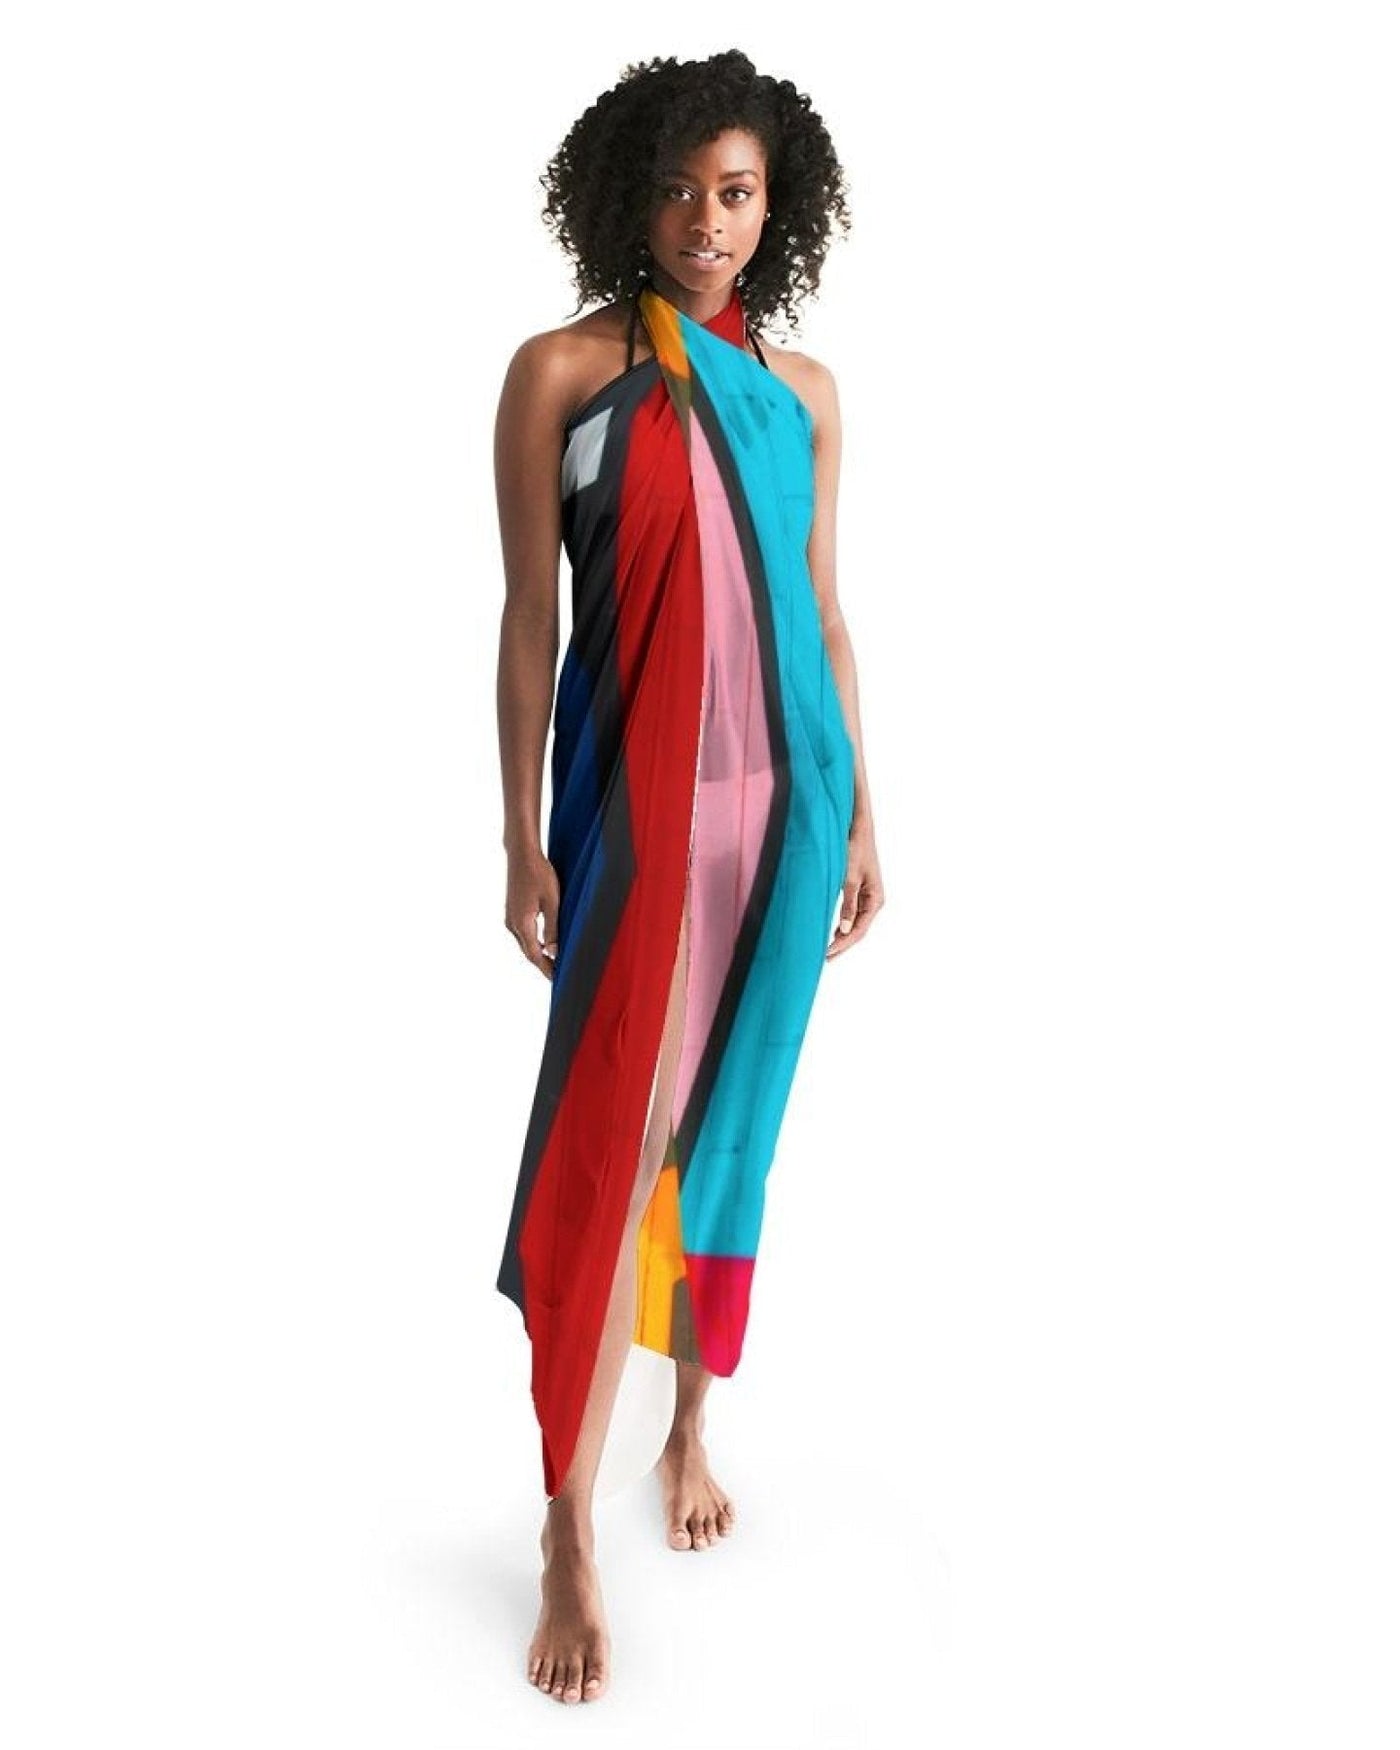 Sheer Colorblock Multicolor Swimsuit Cover Up - Womens | Swimwear | Sarong Wrap